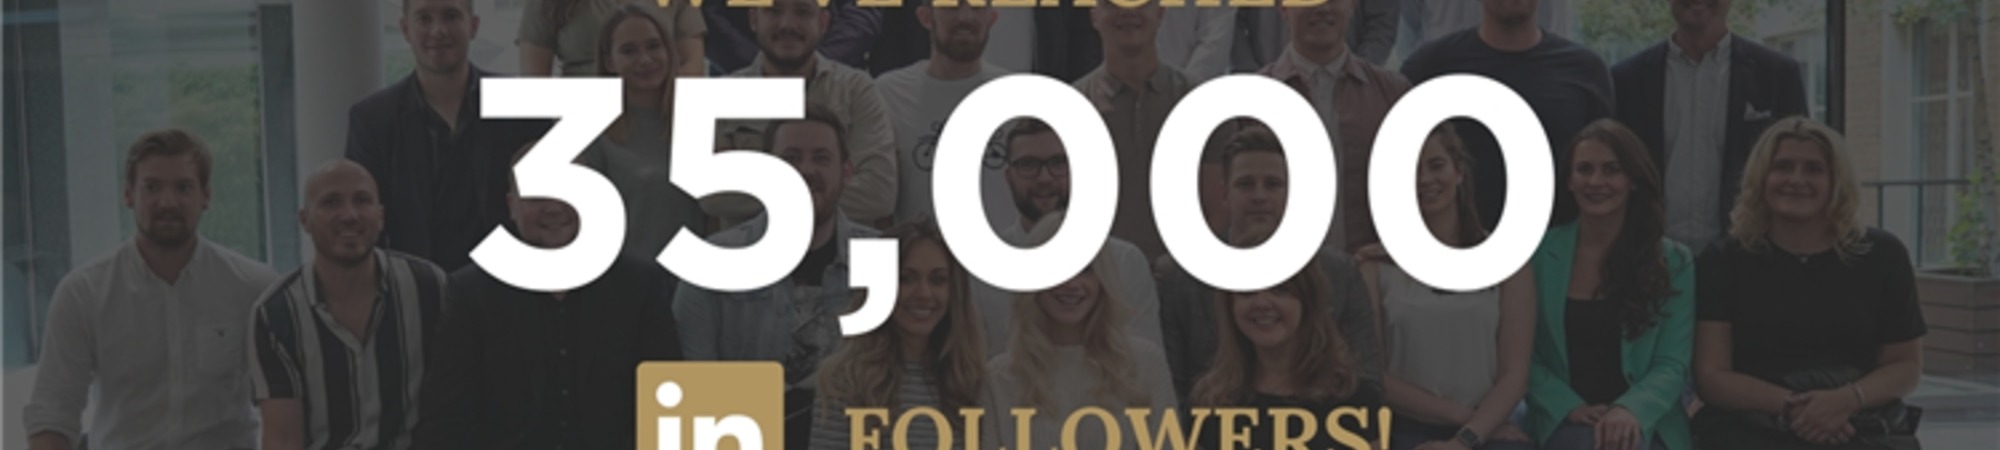 We’ve Reached 35,000 Linked In Followers!